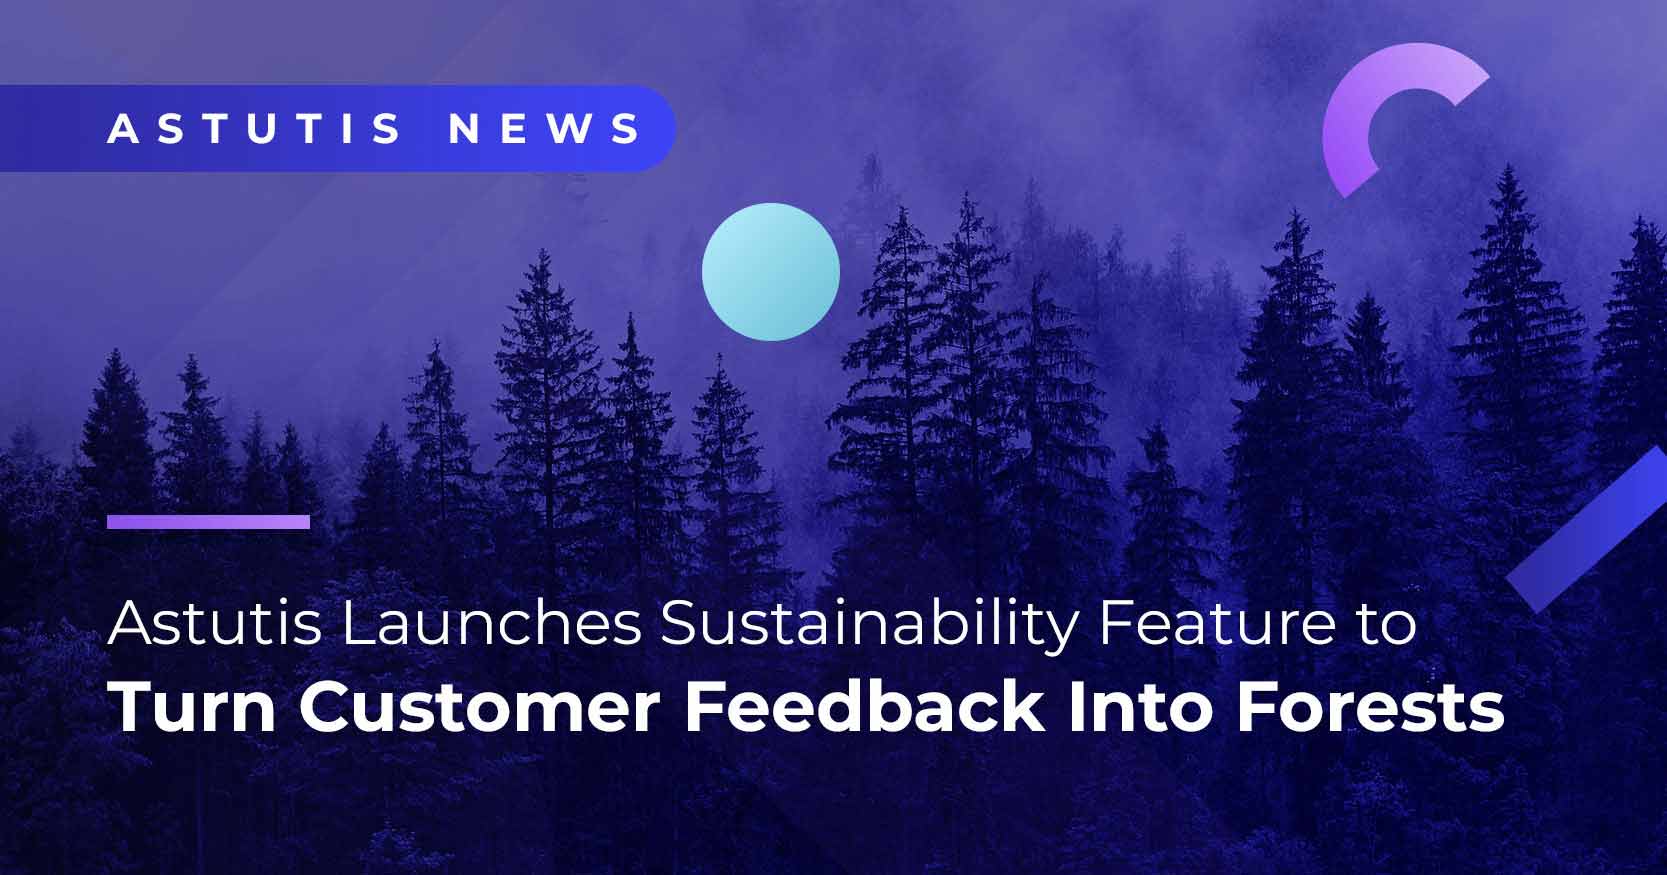 Astutis Launches Sustainability Feature to Turn Customer Feedback into Forests Image